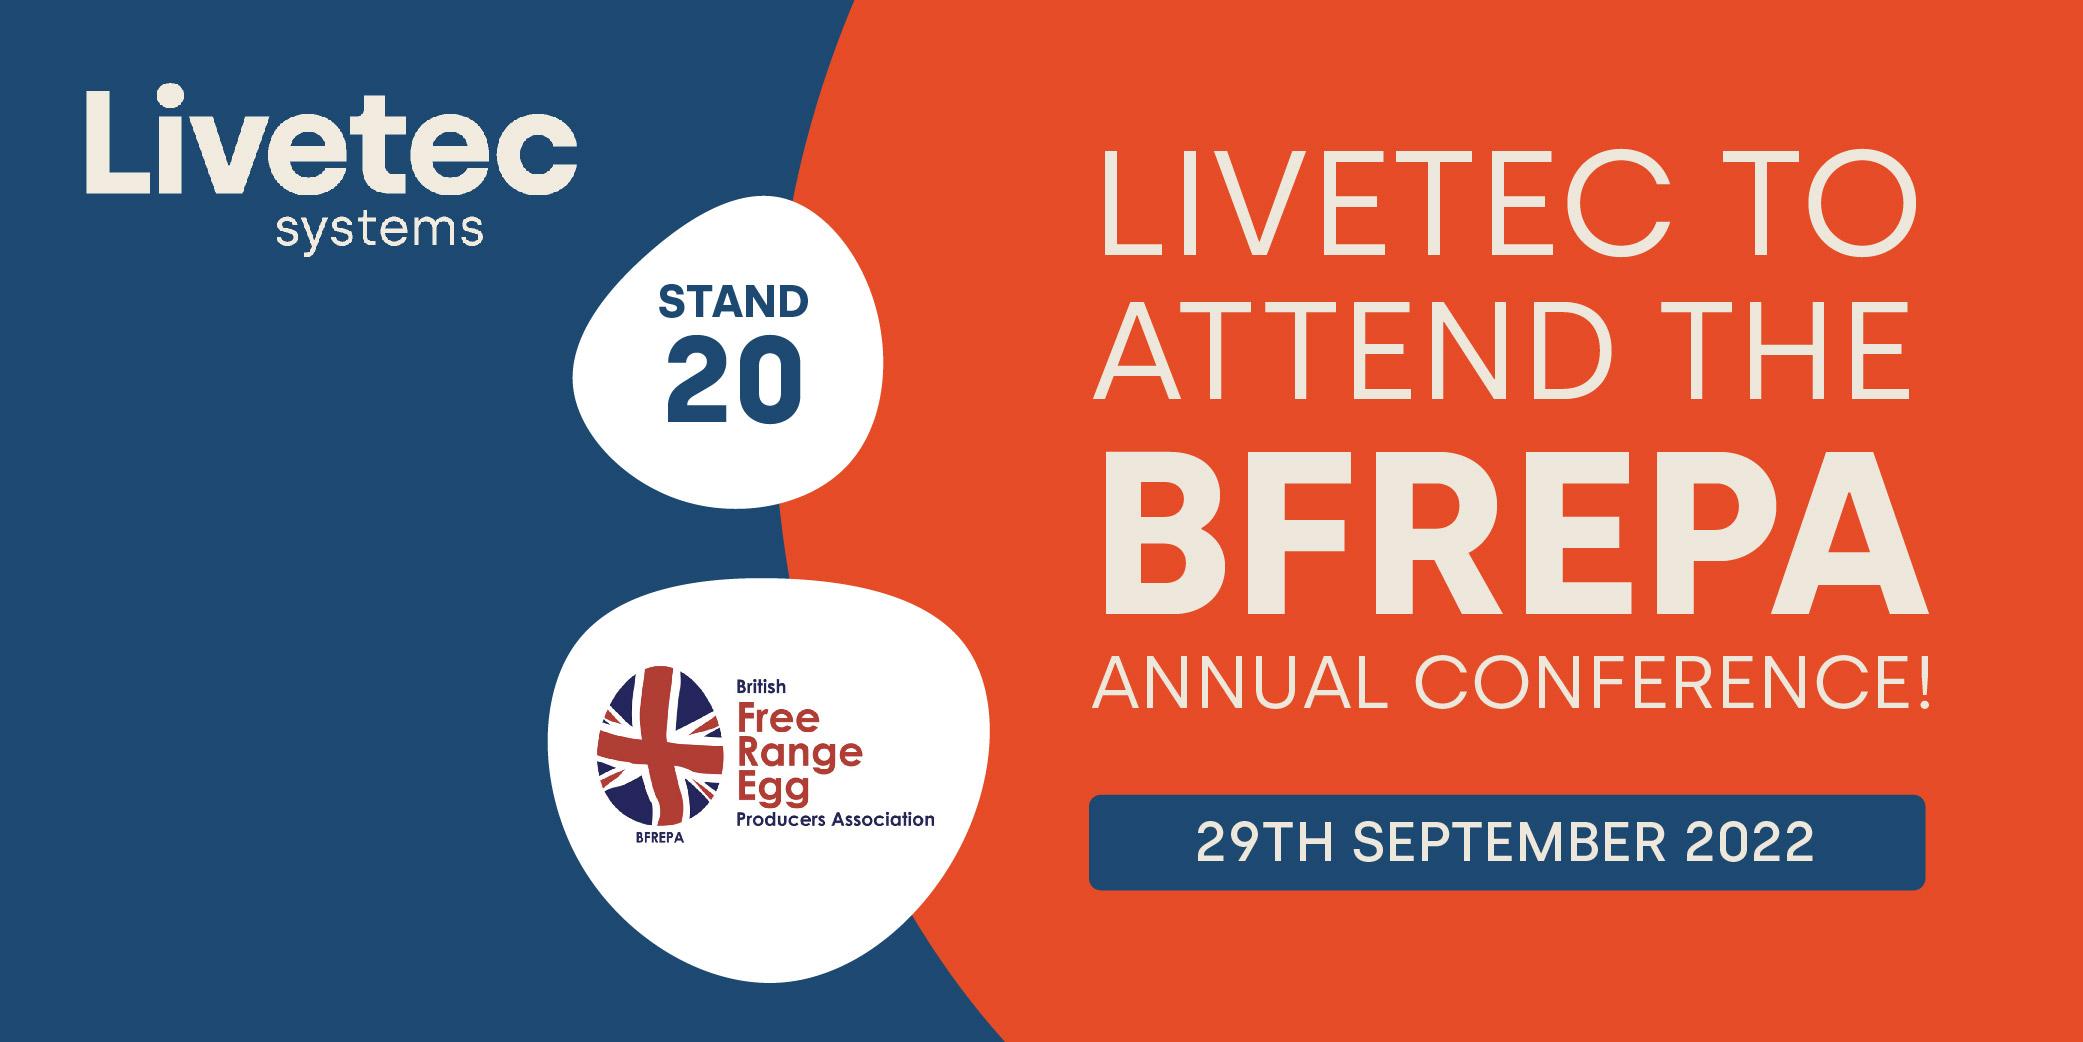 Livetec at the British Free Range Egg Producers Association Conference and Exhibition